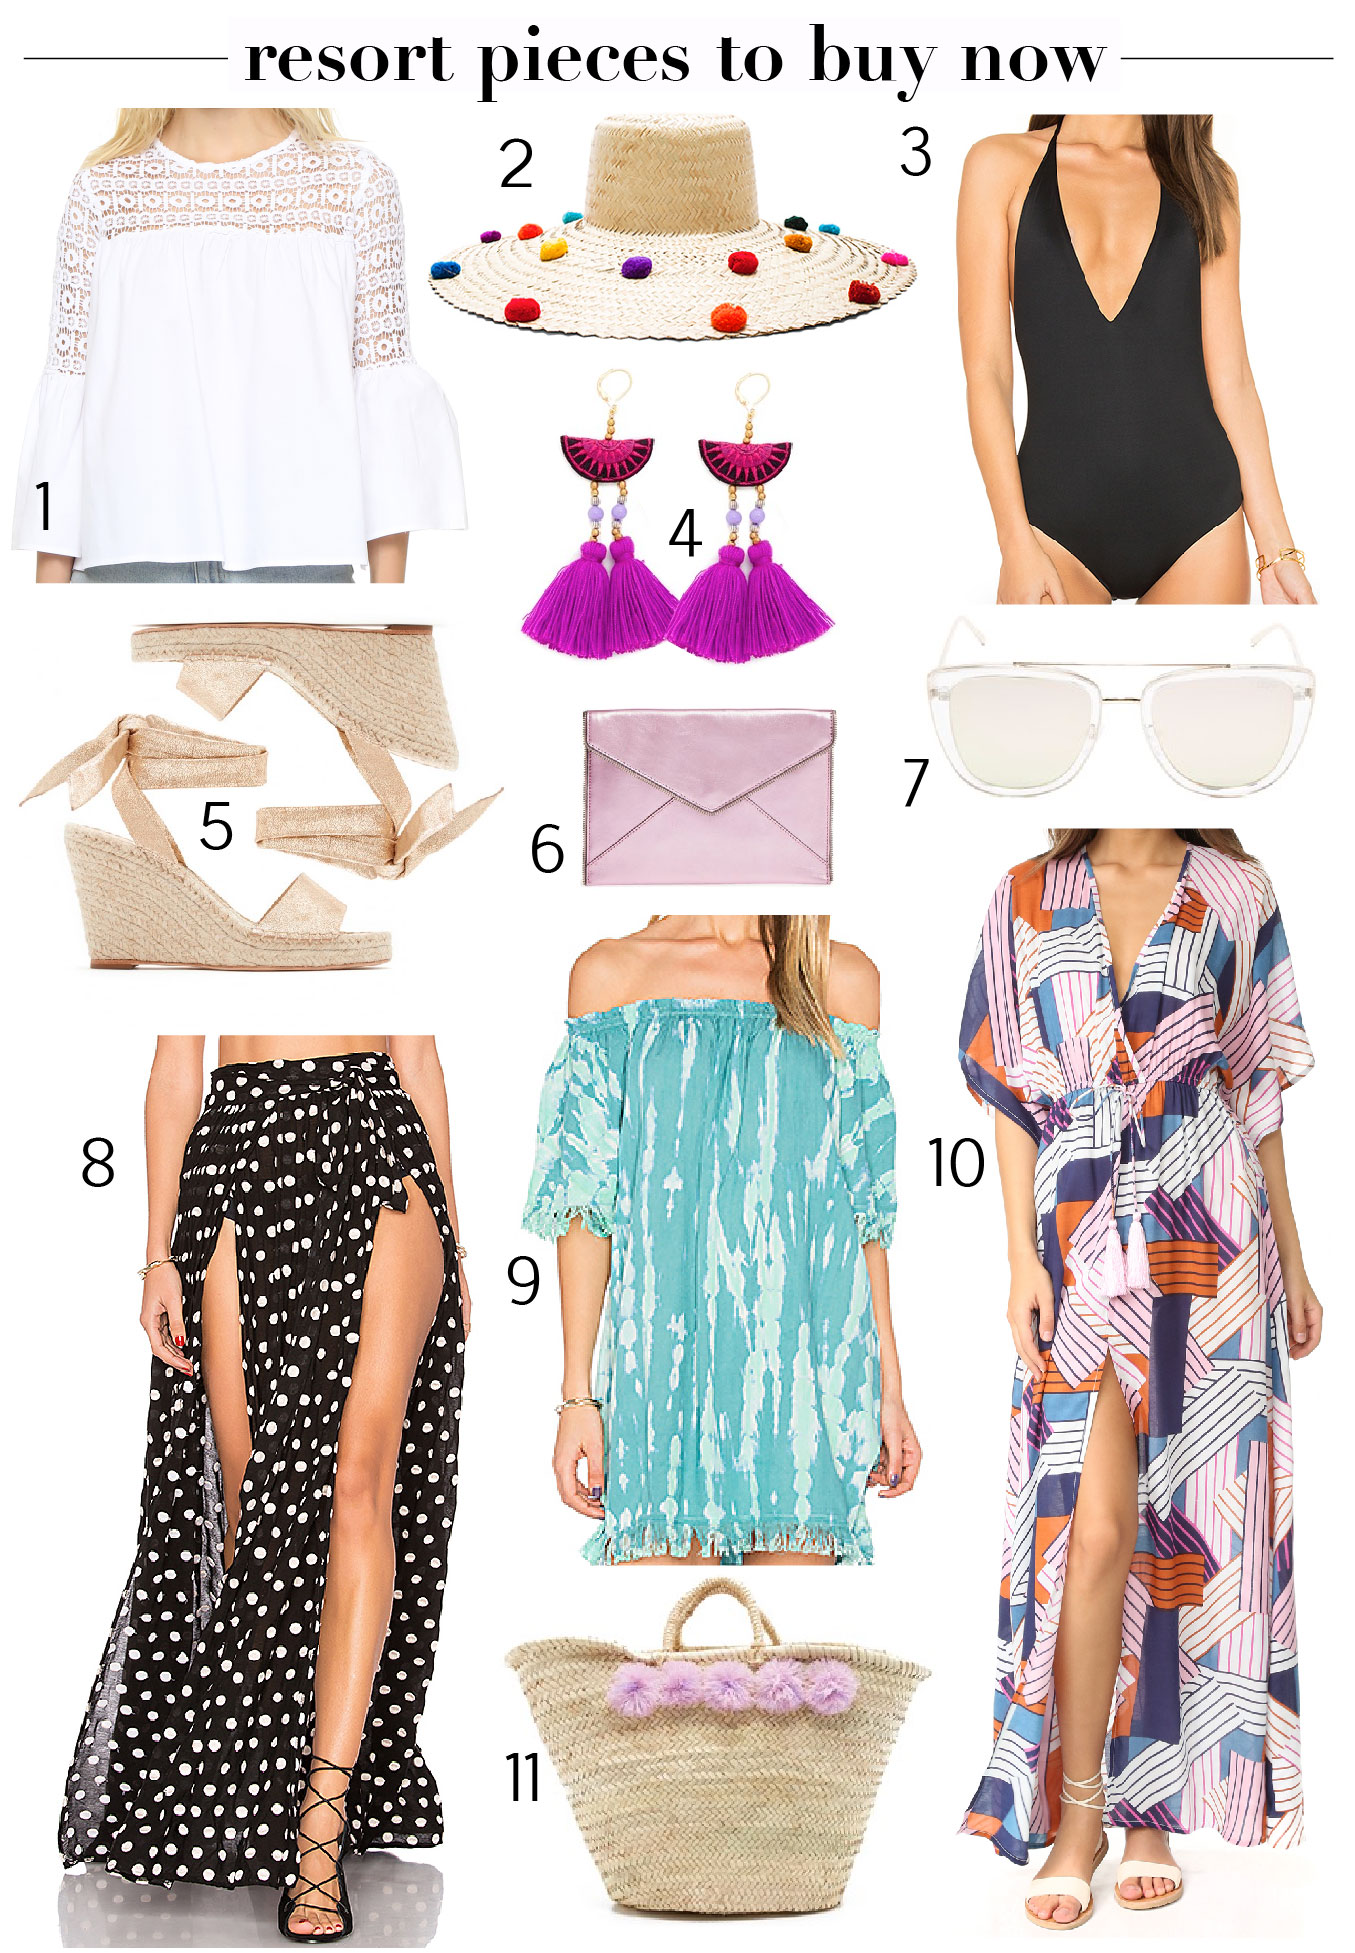 11 Resort Pieces to Buy Now. Yes to all of these!